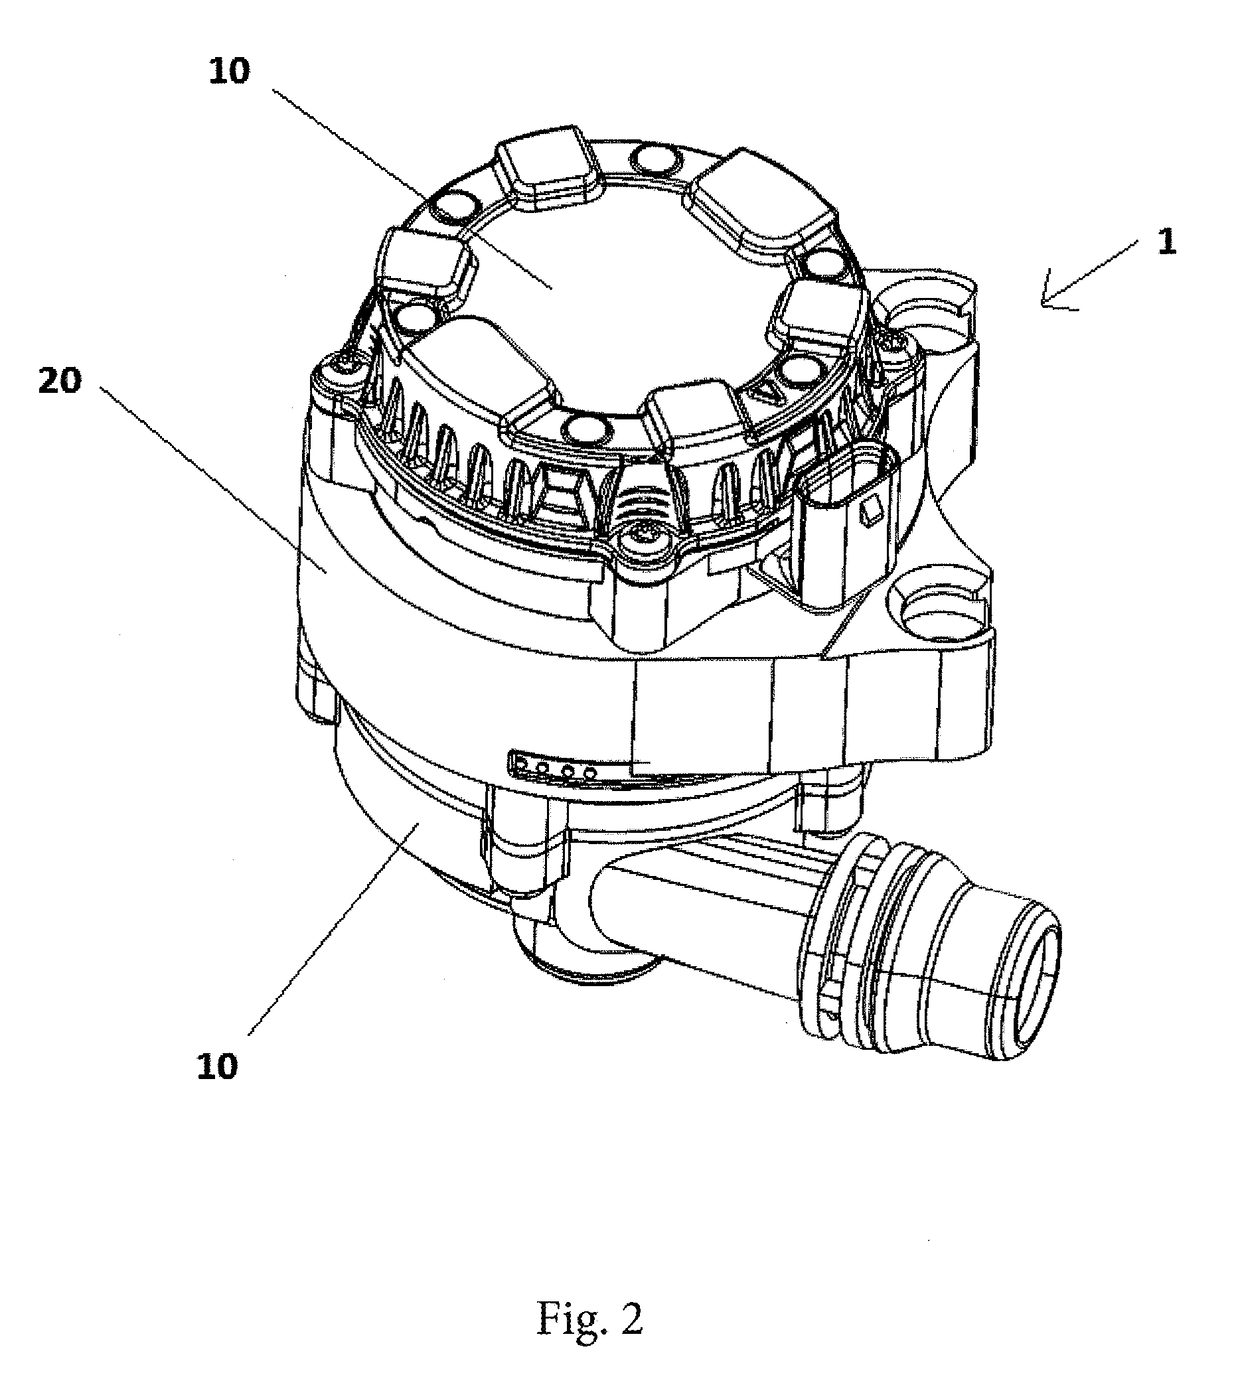 Apparatus for regulating at least one fluid flow in a vehicle